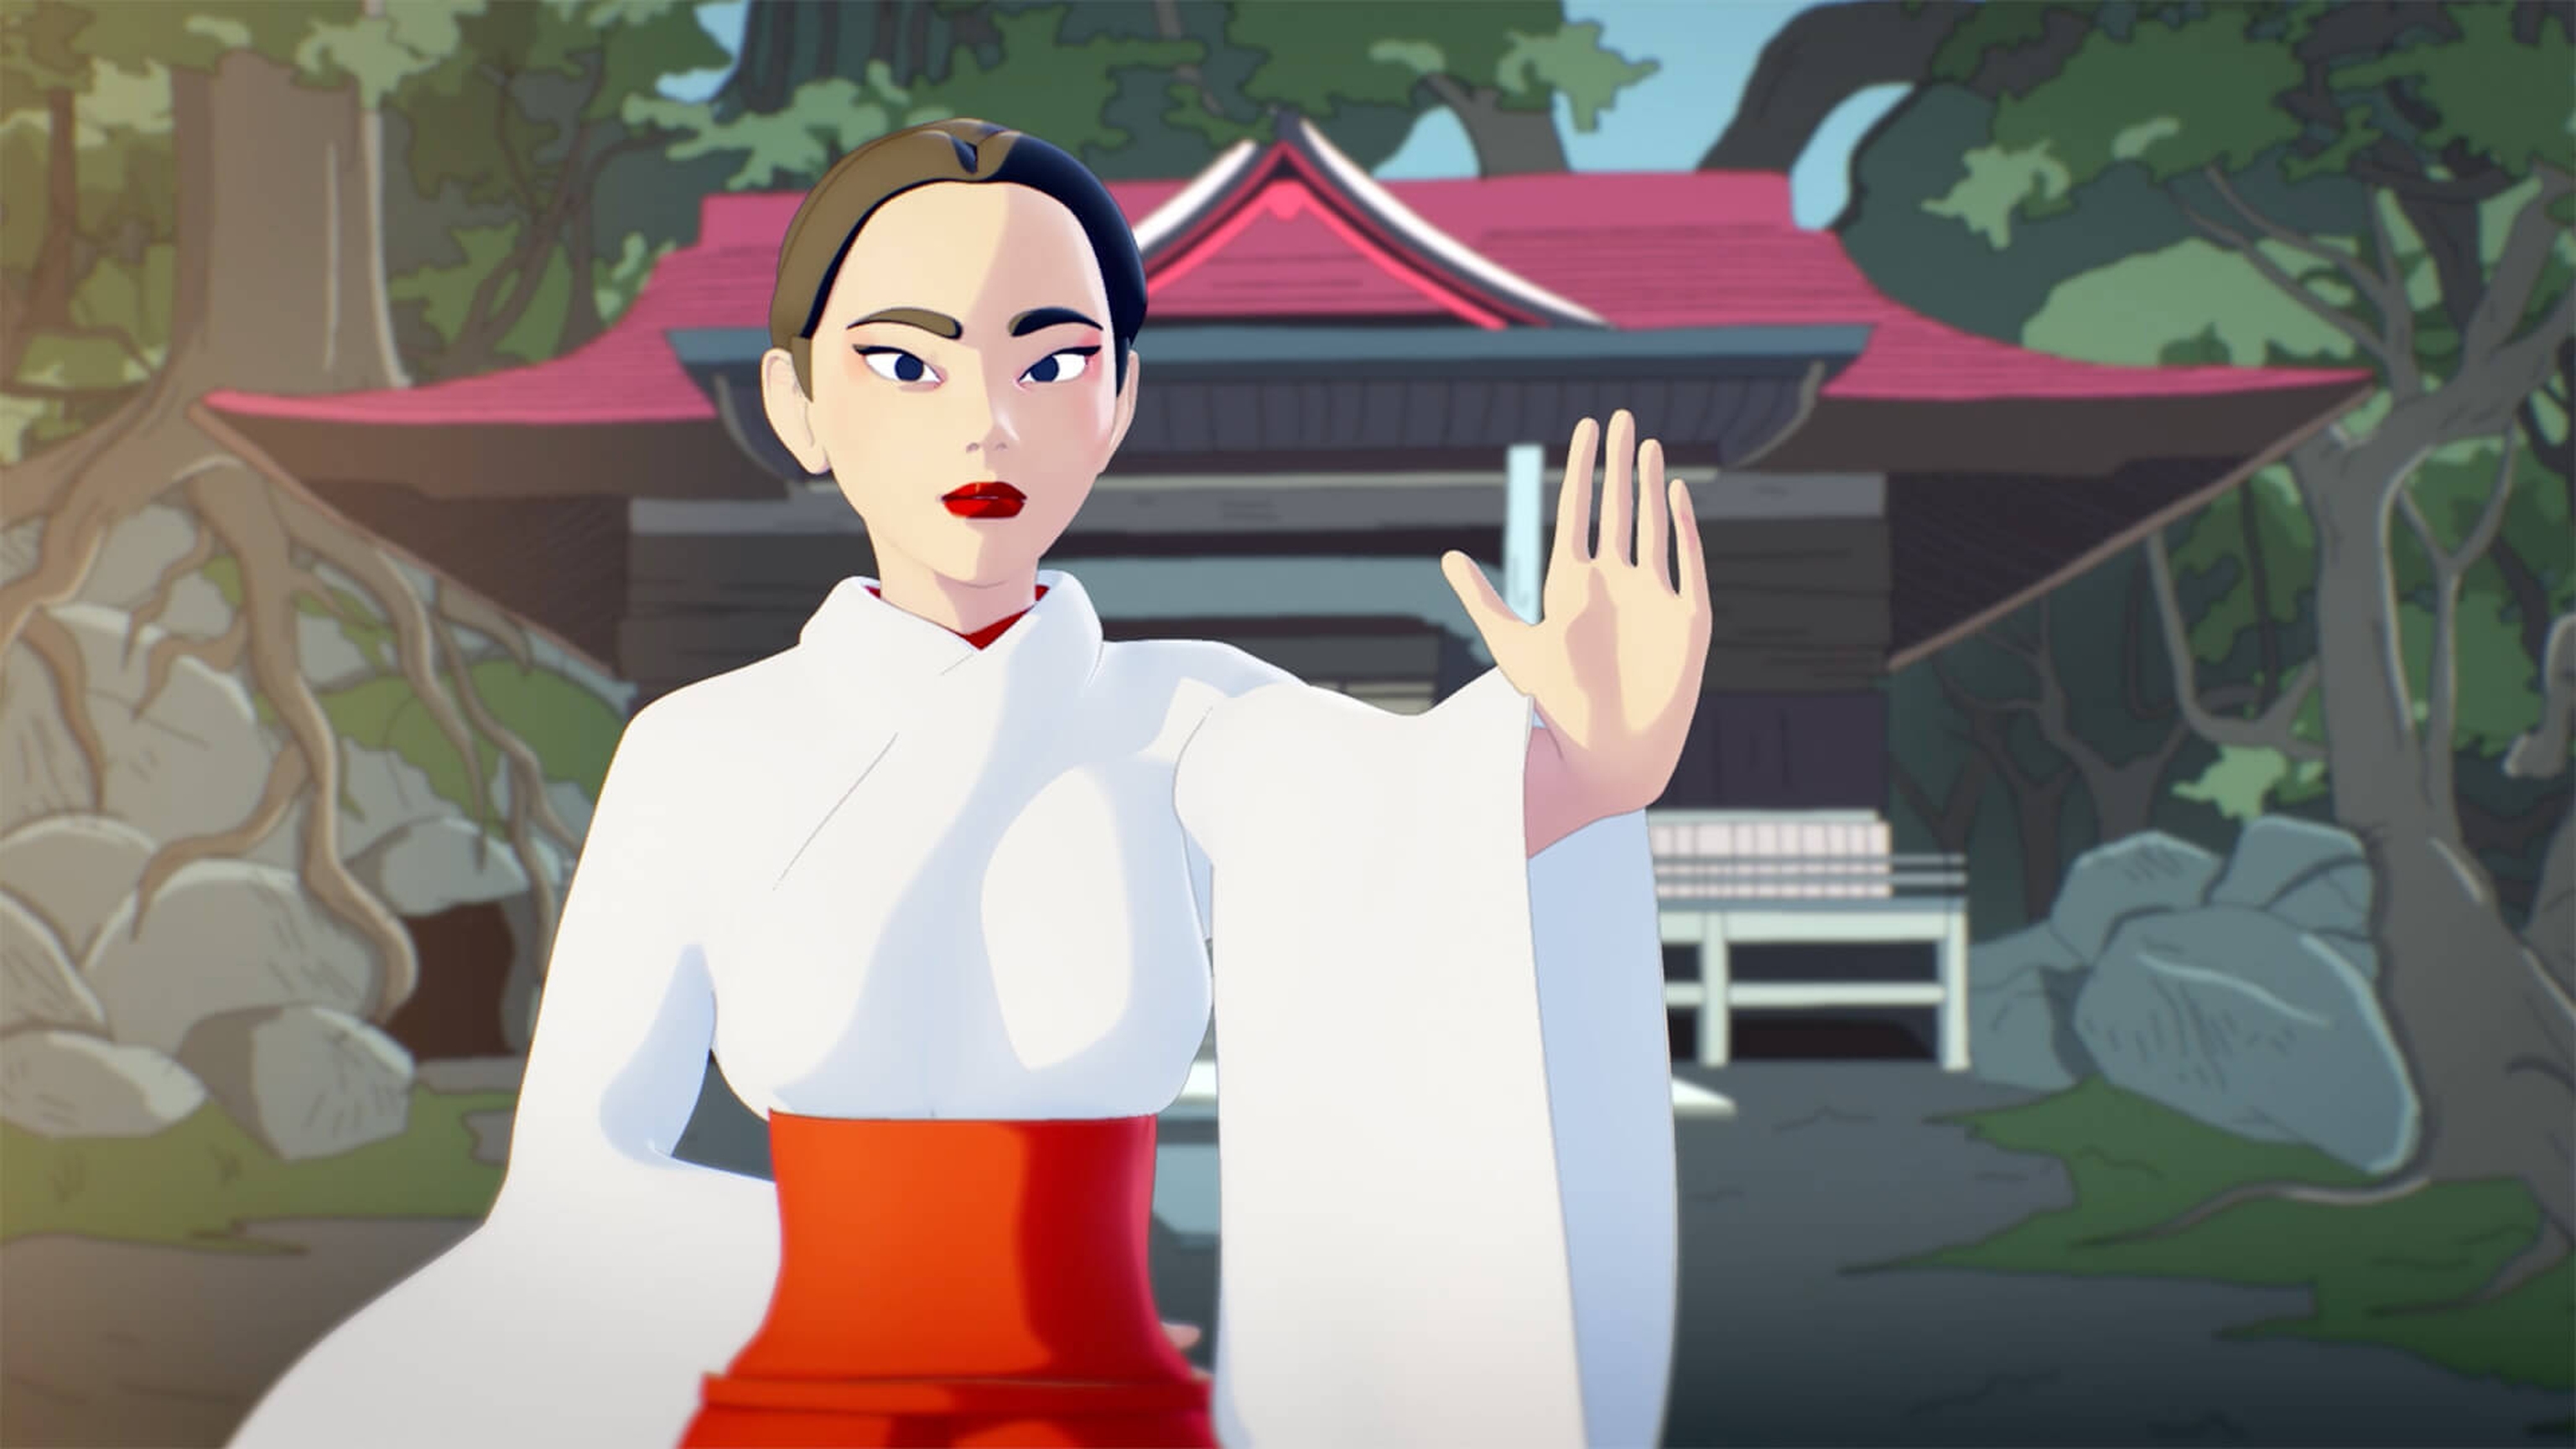 Animated female character stood in front of Japanese house